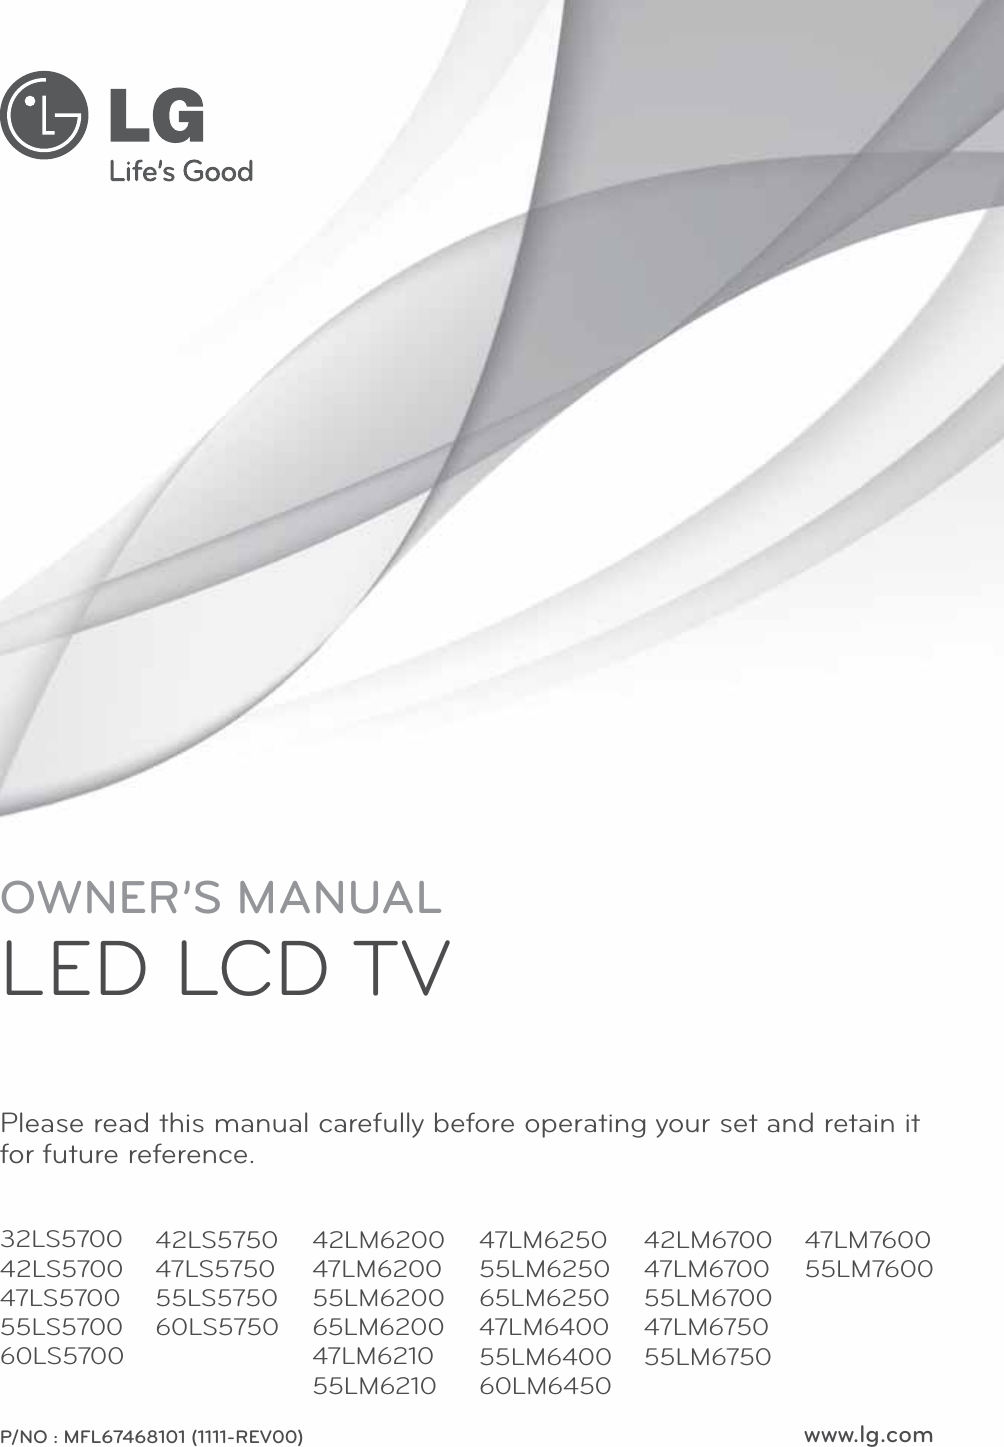 www.lg.comOWNER’S MANUALLED LCD TVPlease read this manual carefully before operating your set and retain it for future reference.32LS570042LS570047LS570055LS570060LS5700P/NO : MFL67468101 (1111-REV00)42LS575047LS575055LS575060LS575042LM620047LM620055LM620065LM620047LM621055LM621047LM625055LM625065LM625047LM640055LM640060LM645042LM670047LM670055LM670047LM675055LM675047LM760055LM7600